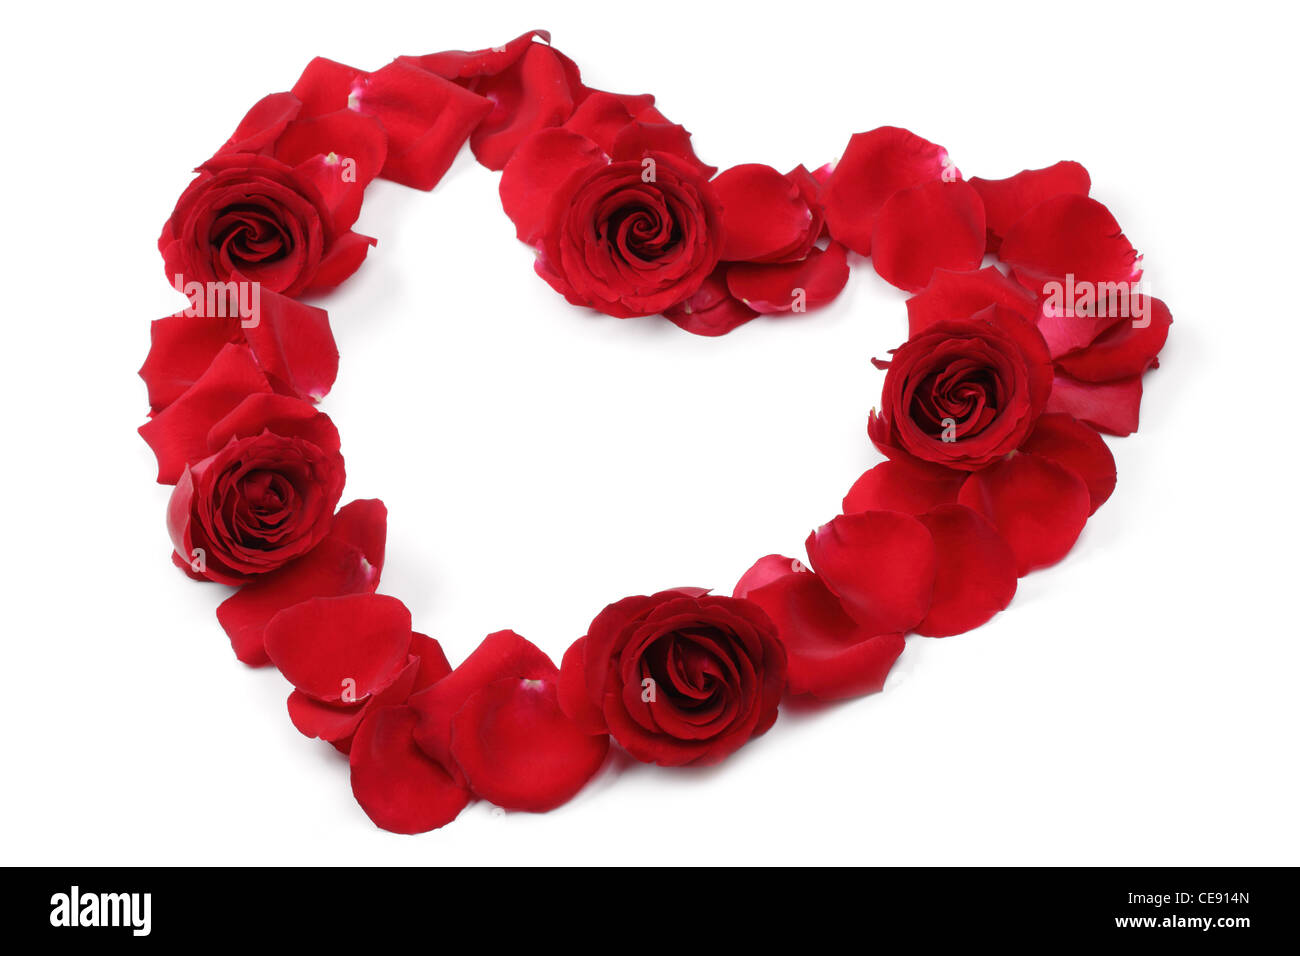 Red rose Cut Out Stock Images & Pictures - Alamy